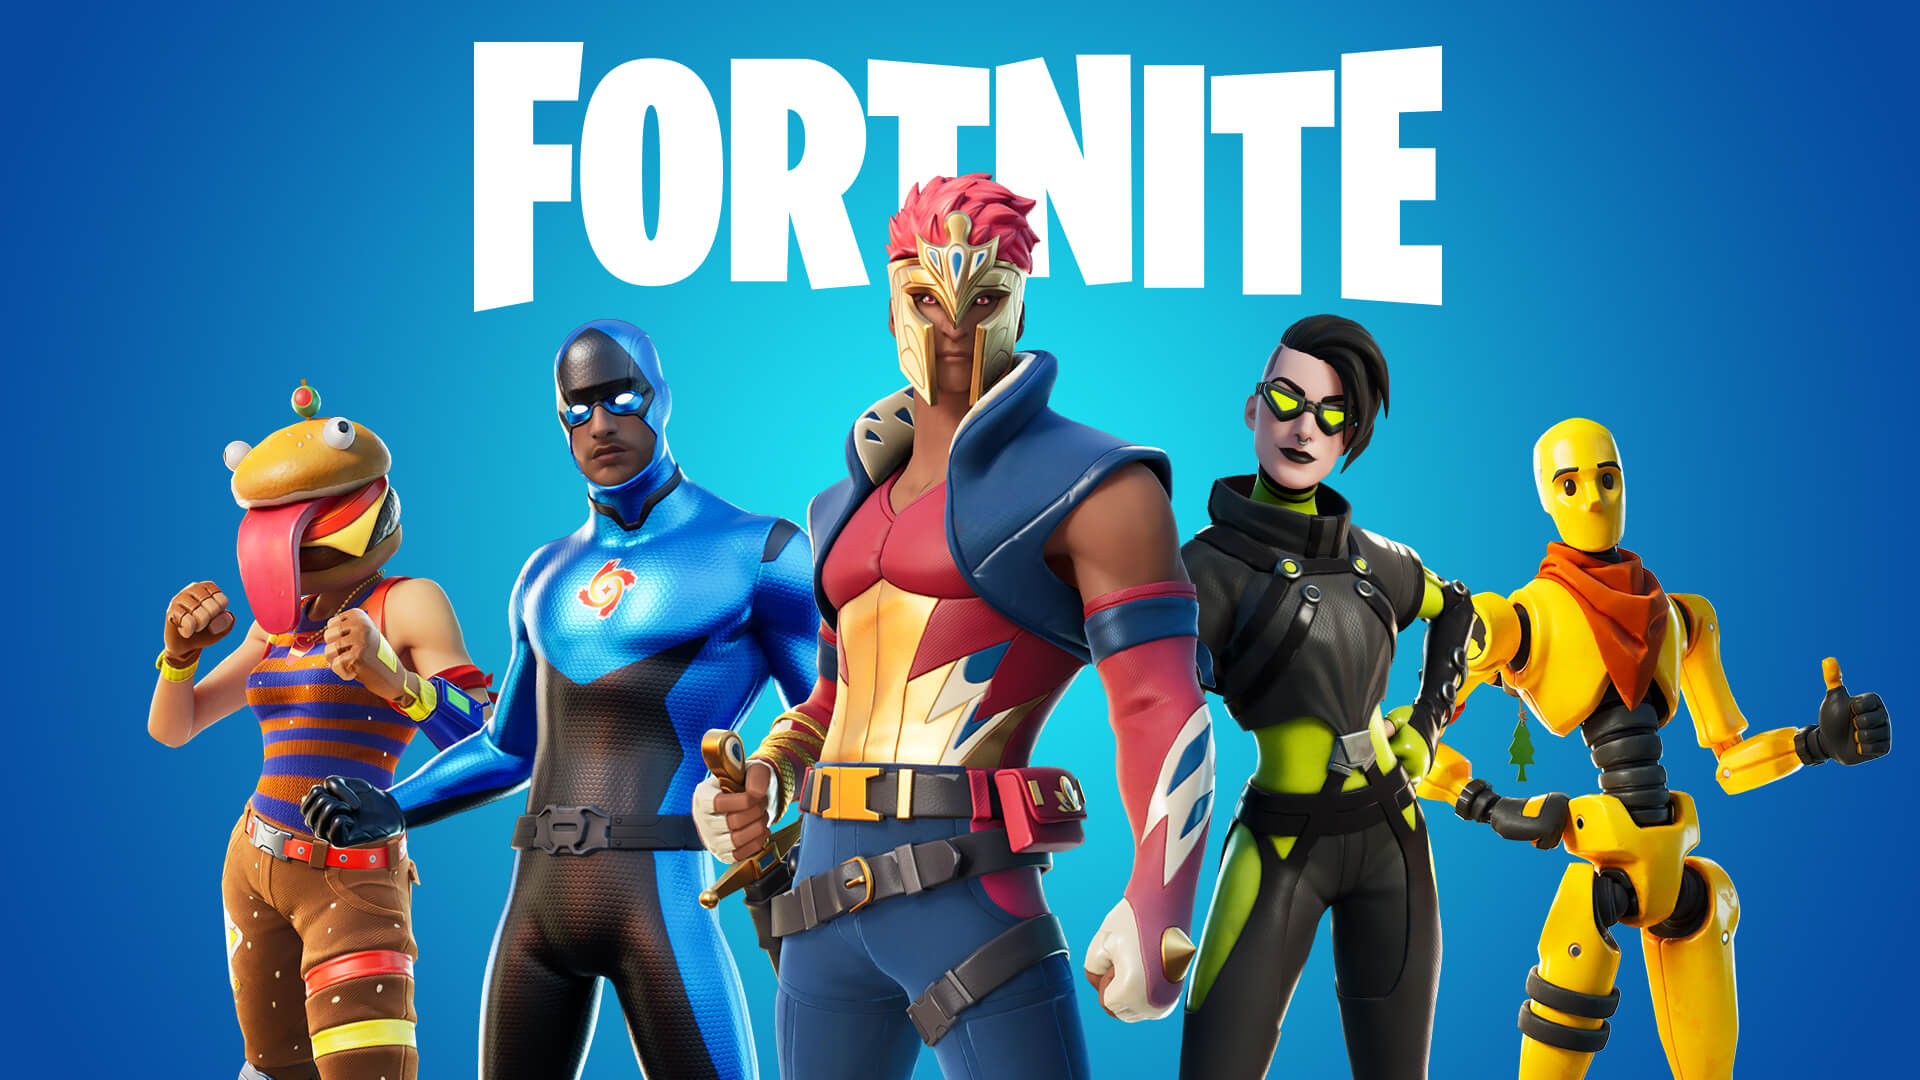 Fortnite is back on iPhones and iPads thanks to Nvidia | NextPit